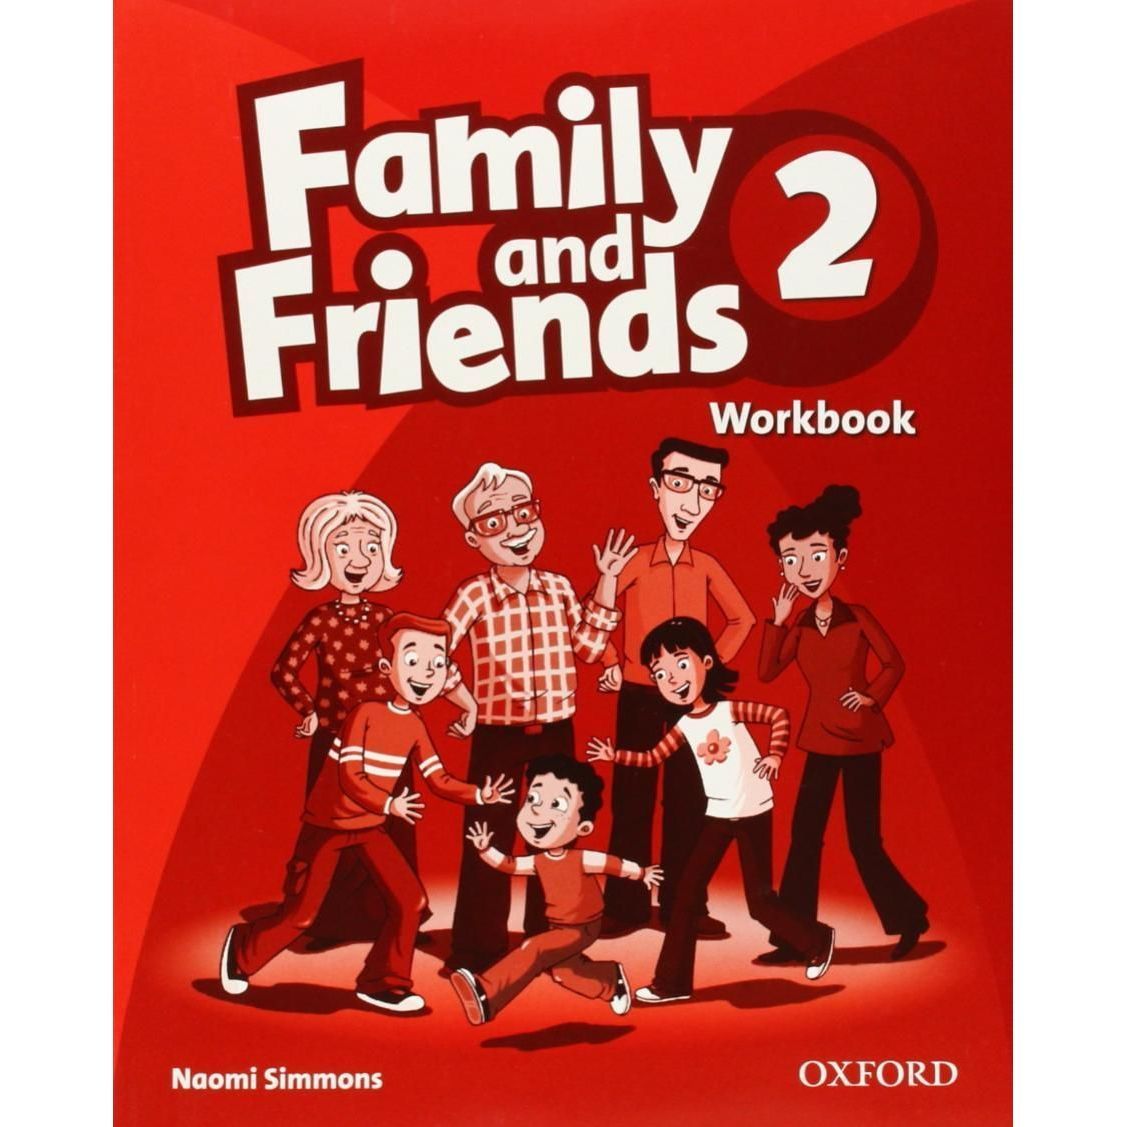 Books my family. Family and friends 2 class book рабочая тетрадь. Family and friends рабочая тетрадь. Family and friends учебник 2 класс рабочая тетрадь. Рабочая тетрадка по английскому языку Family and friends 3 Workbook 2nd Edition.